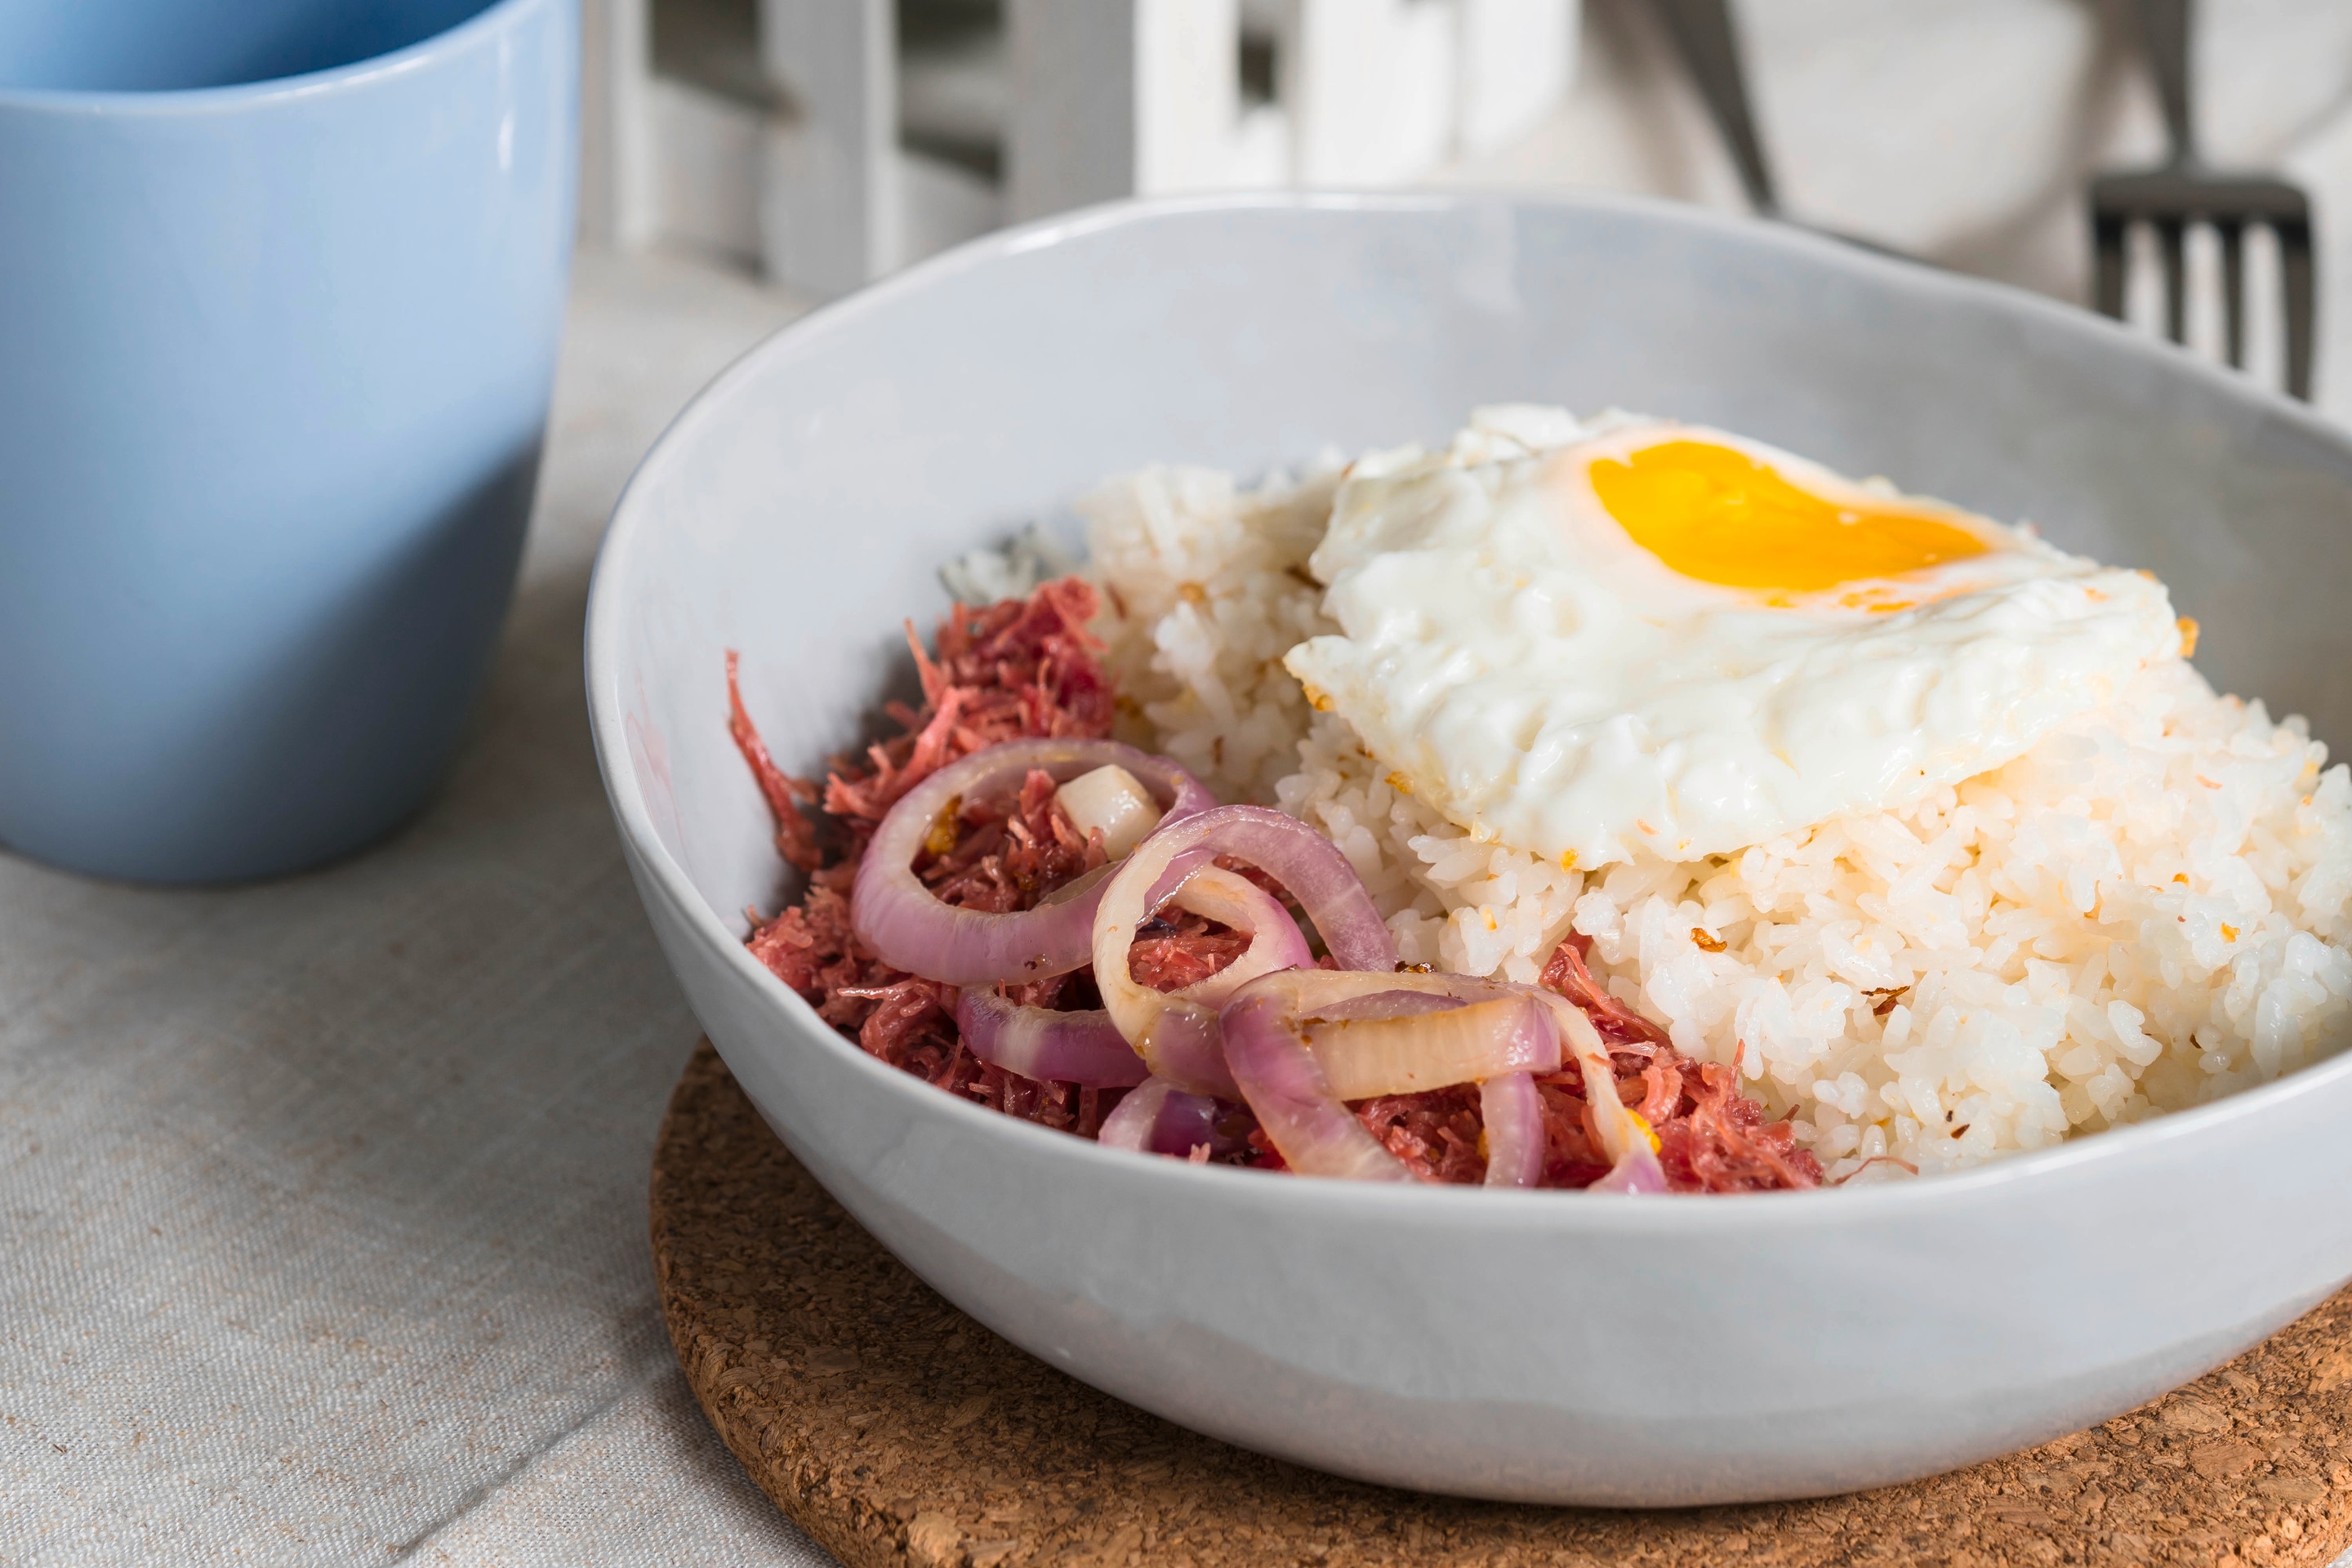 Classic Filipino corned beef hash for breakfast served with fried rice and sunny side up egg